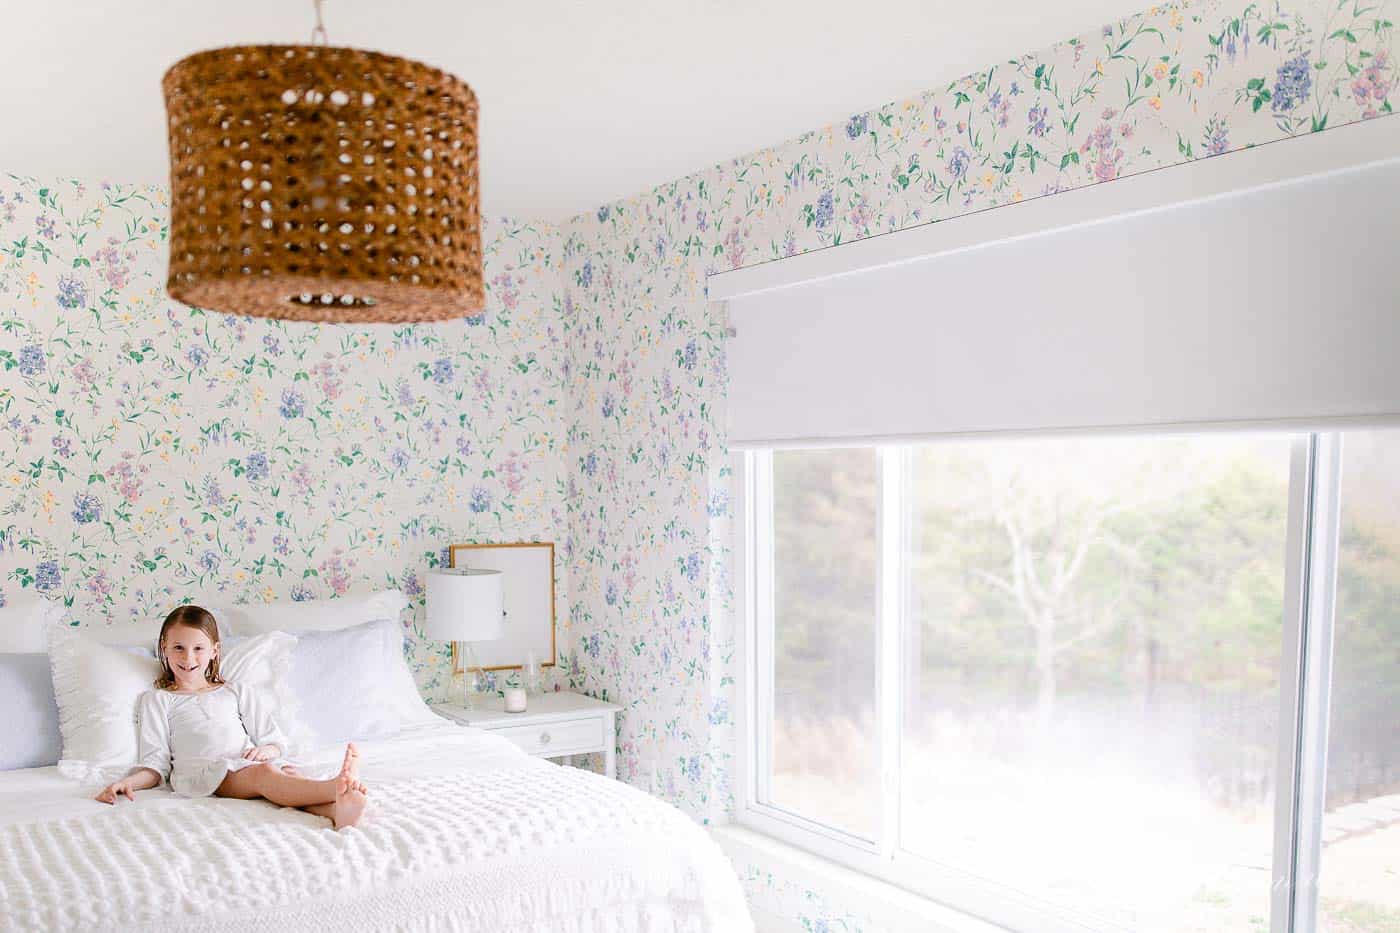 Floral wallpapered bedroom, a little girl lies on the bed with a remote for a motorized roller shade.